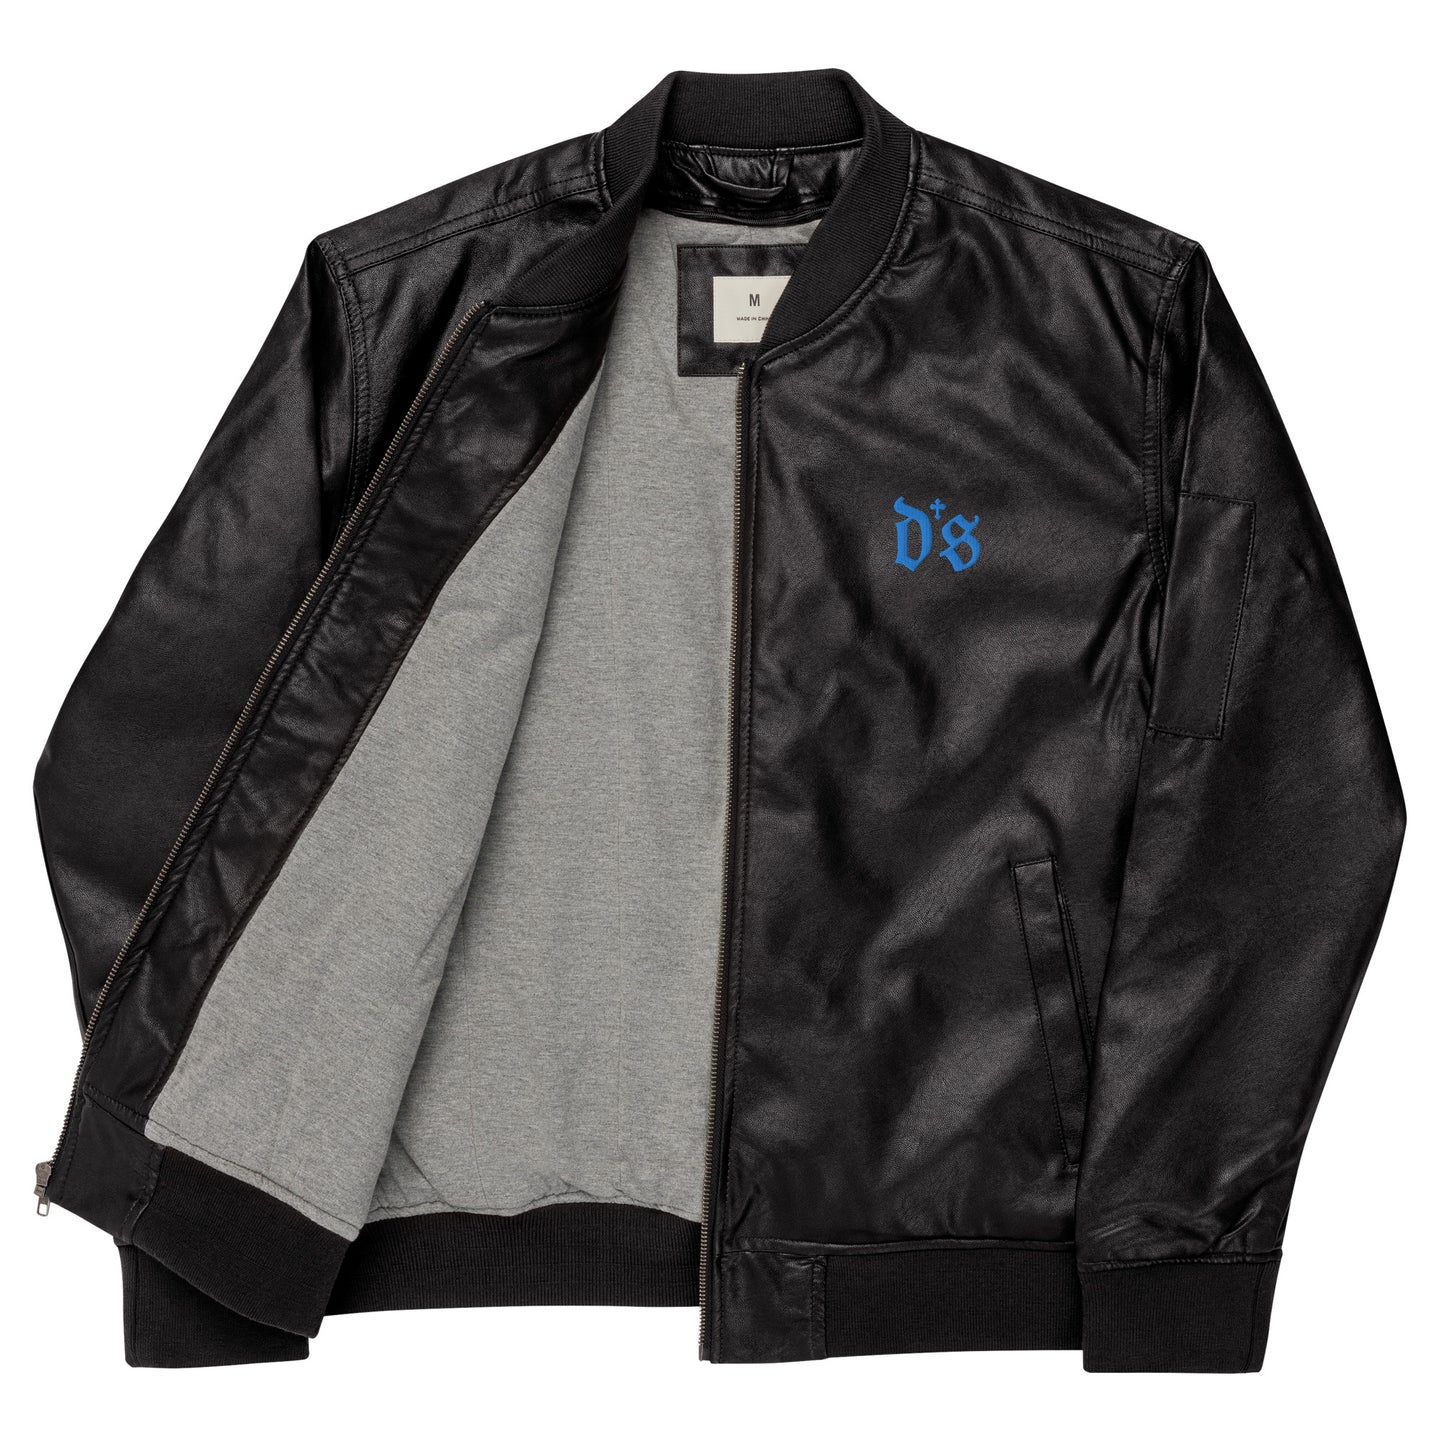 Lost Boys - DS Island Kings Leather Bomber Jacket